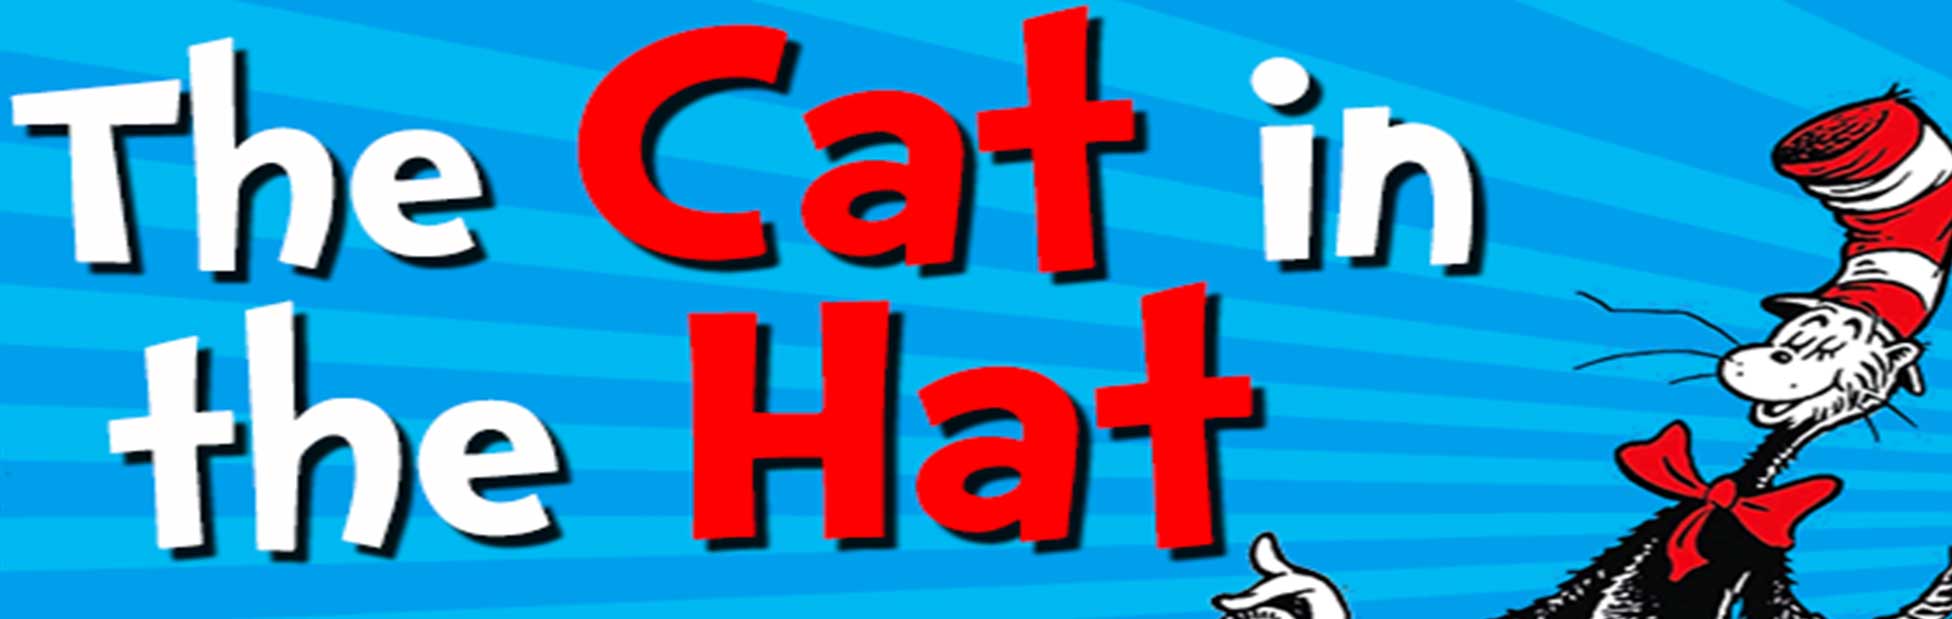 Imafe of the cat in the hat